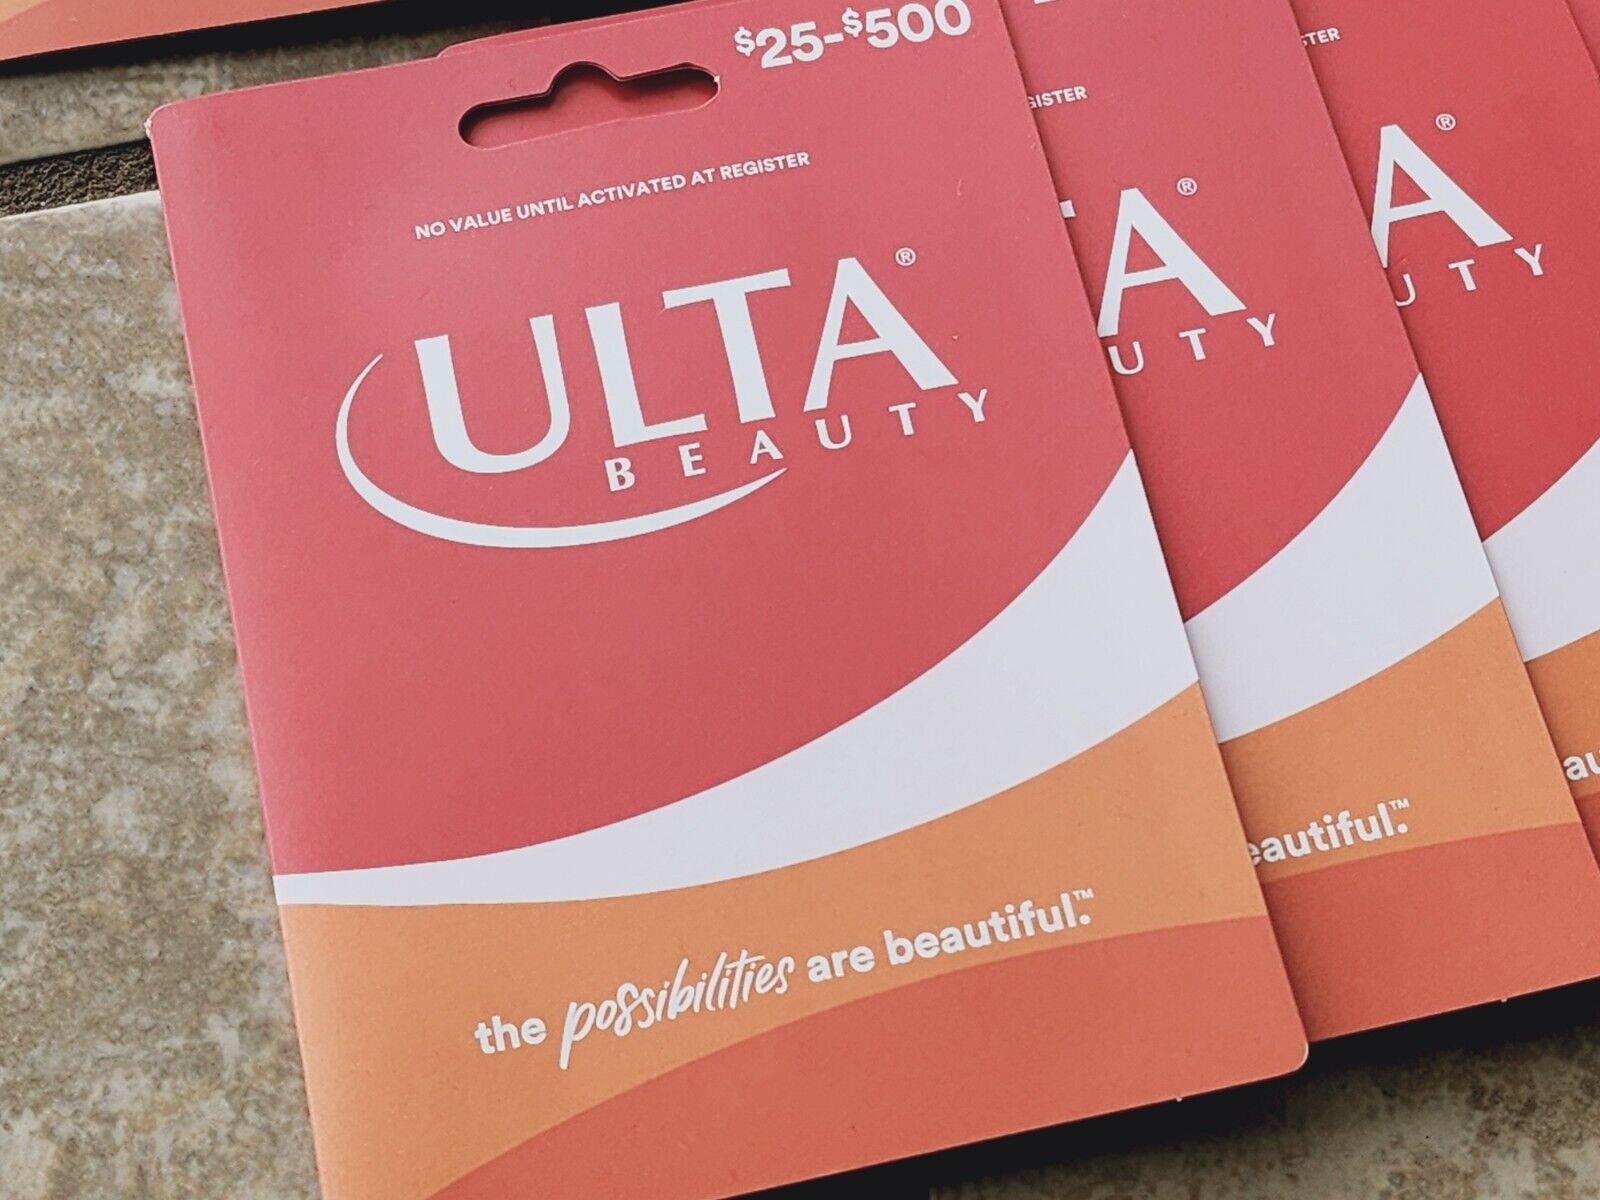 NOT ACTIVATED/NO BALANCE Ulta beauty $25-$500 physical gift card lot of 10